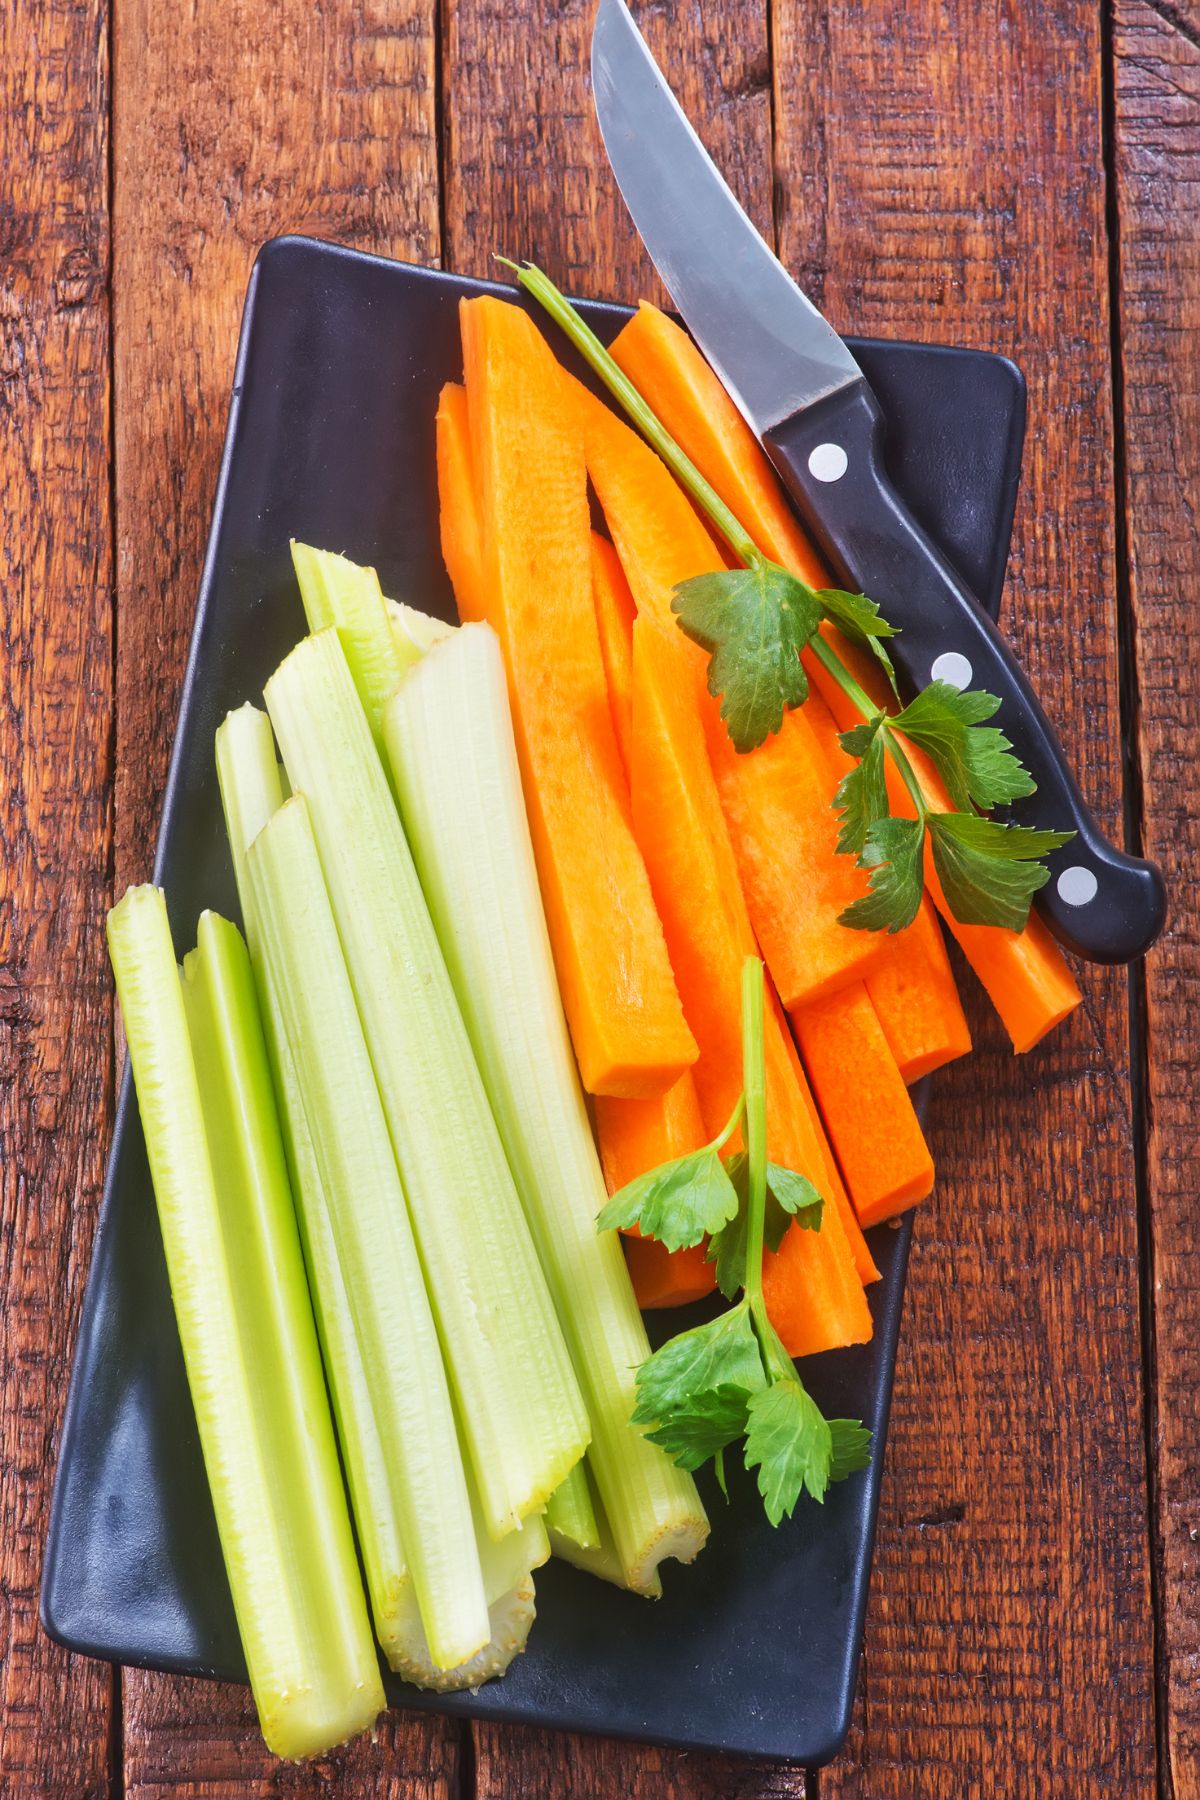 Sliced carrots and celery on a serving plate.